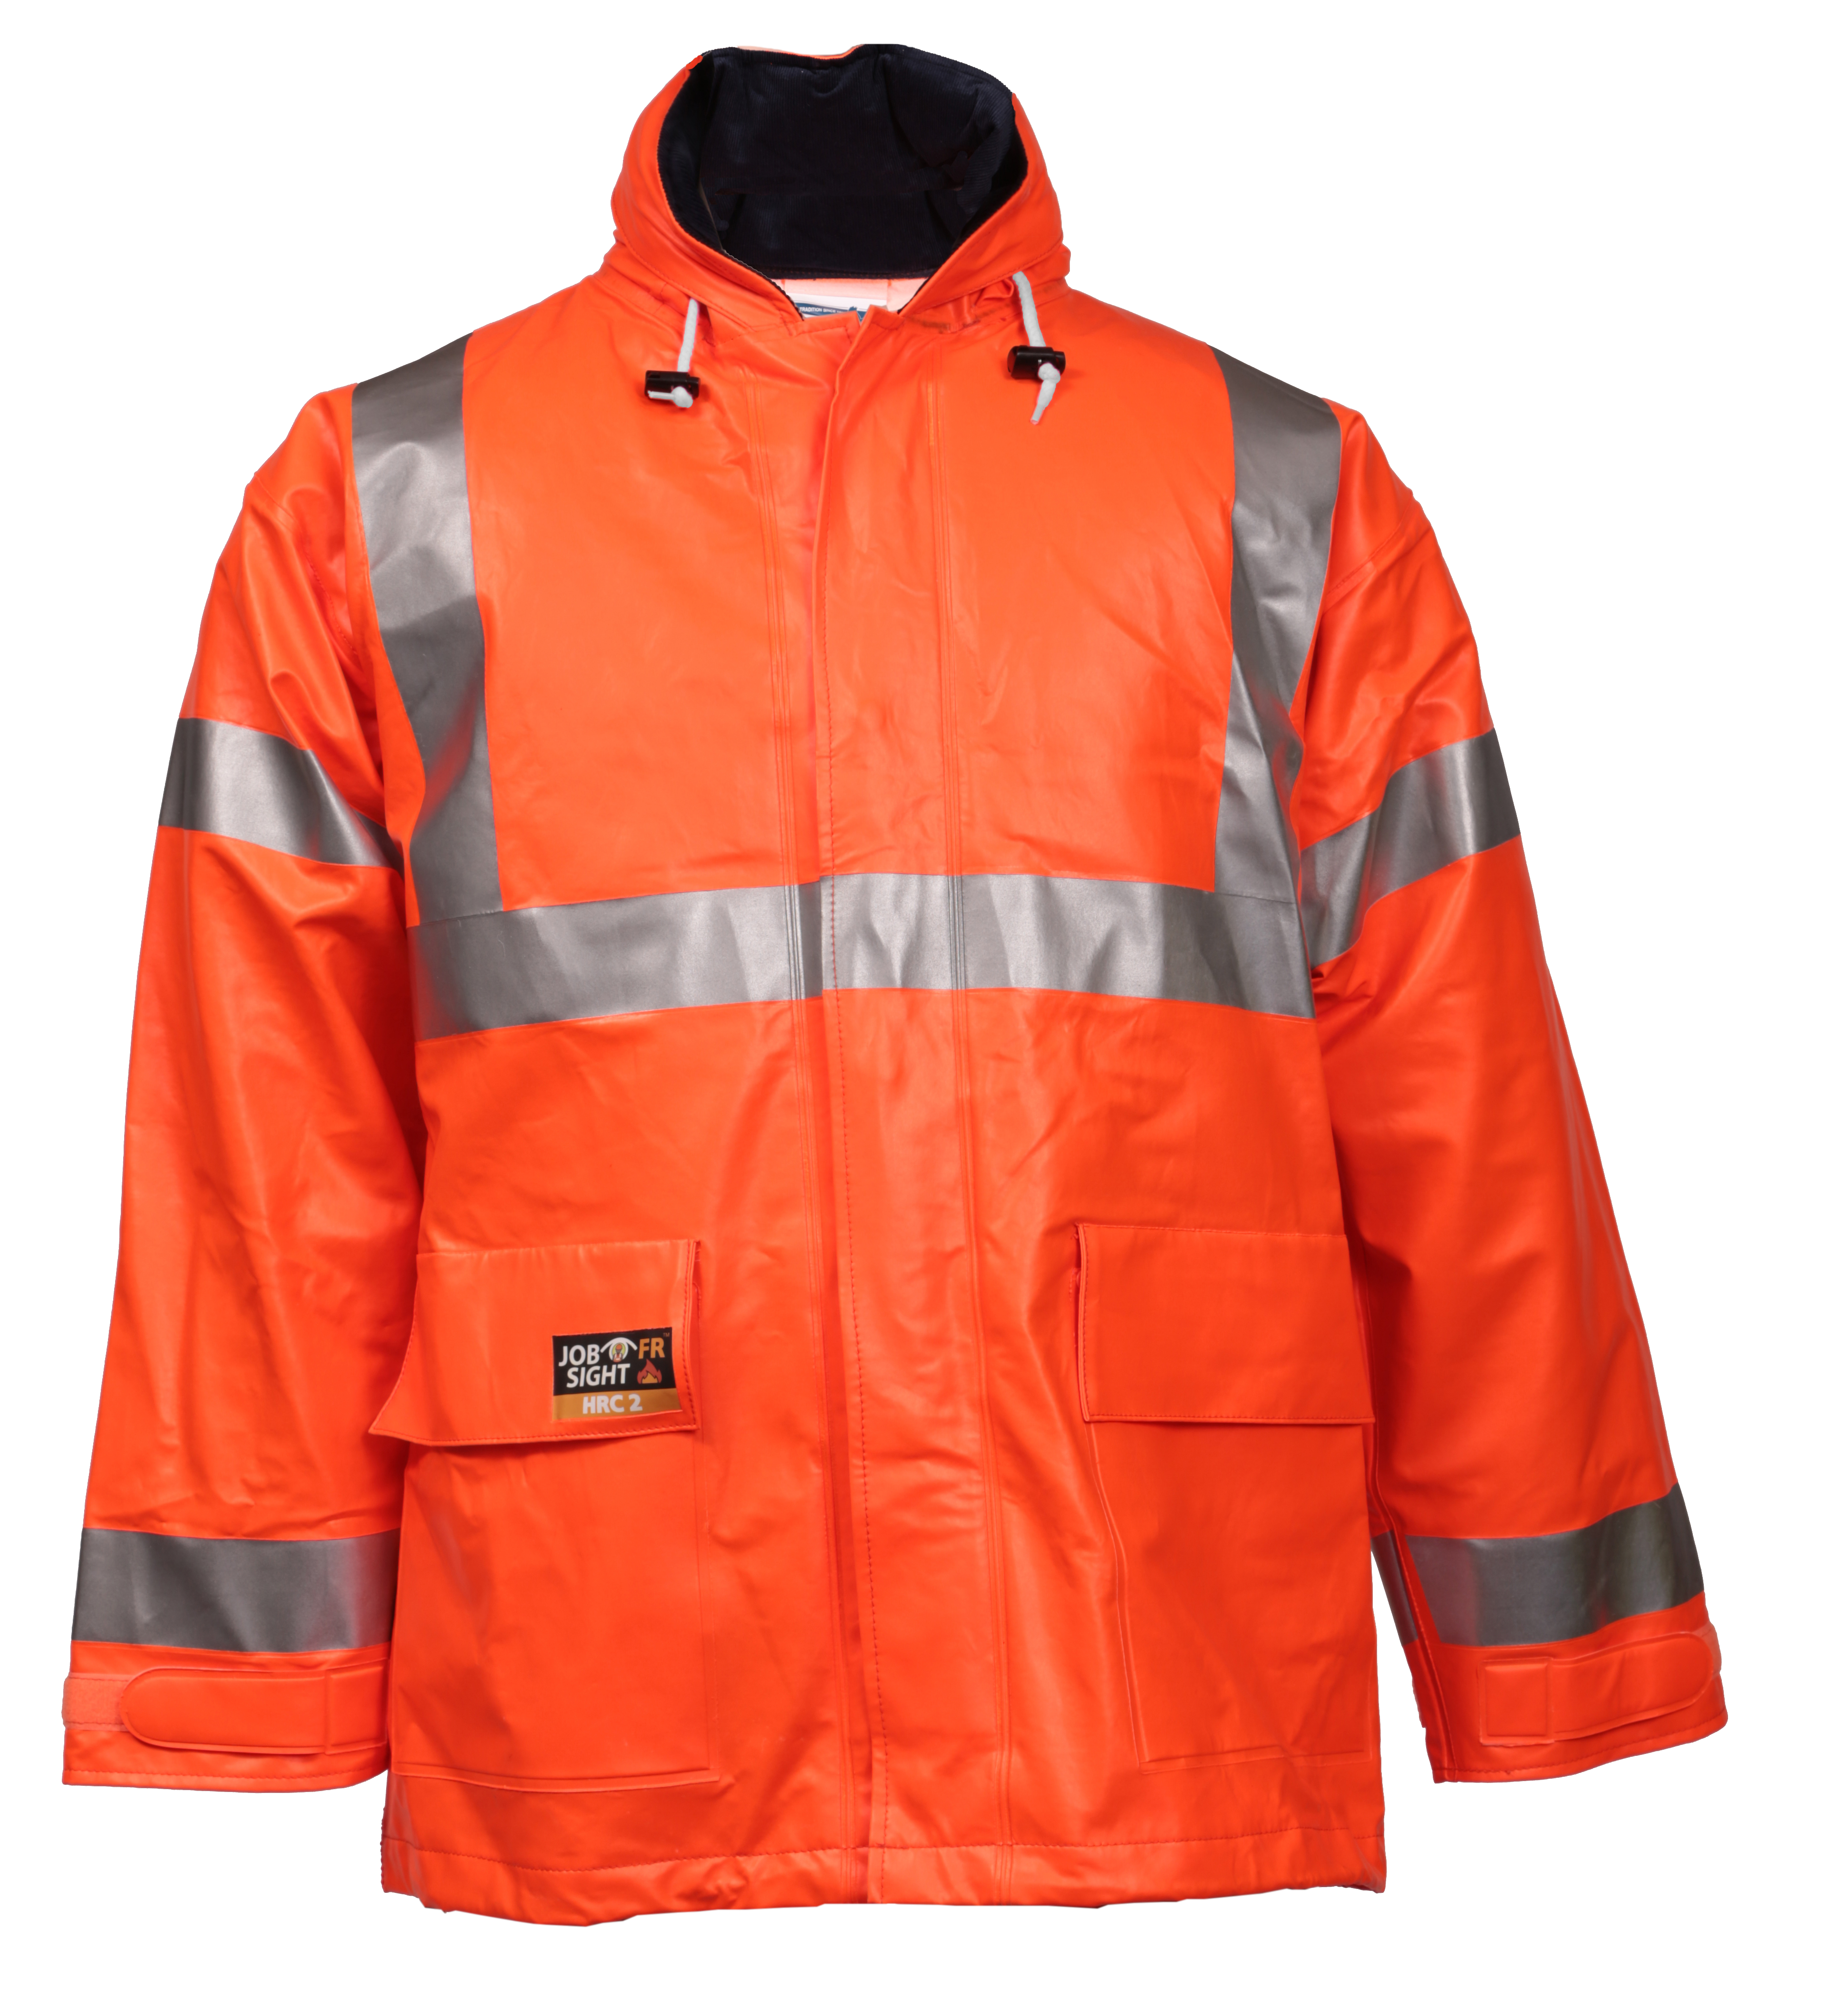 Eclipse™ Jacket - Fluorescent Orange-Red - Attached Hood - Silver Reflective Tape-eSafety Supplies, Inc